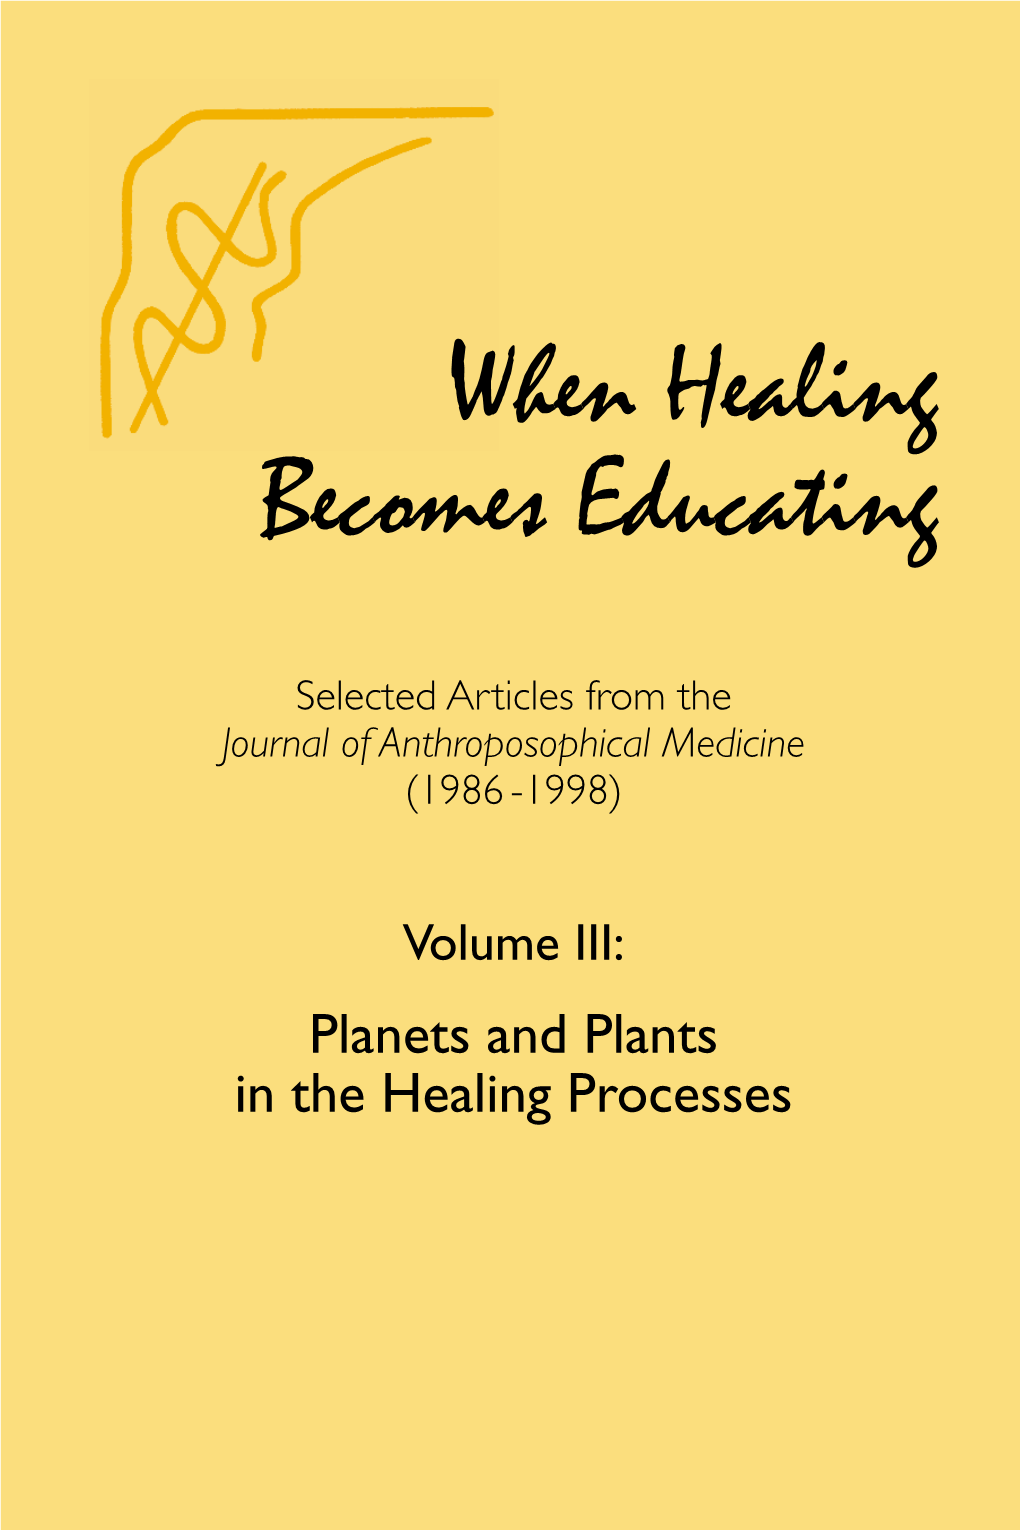 When Healing Becomes Educating